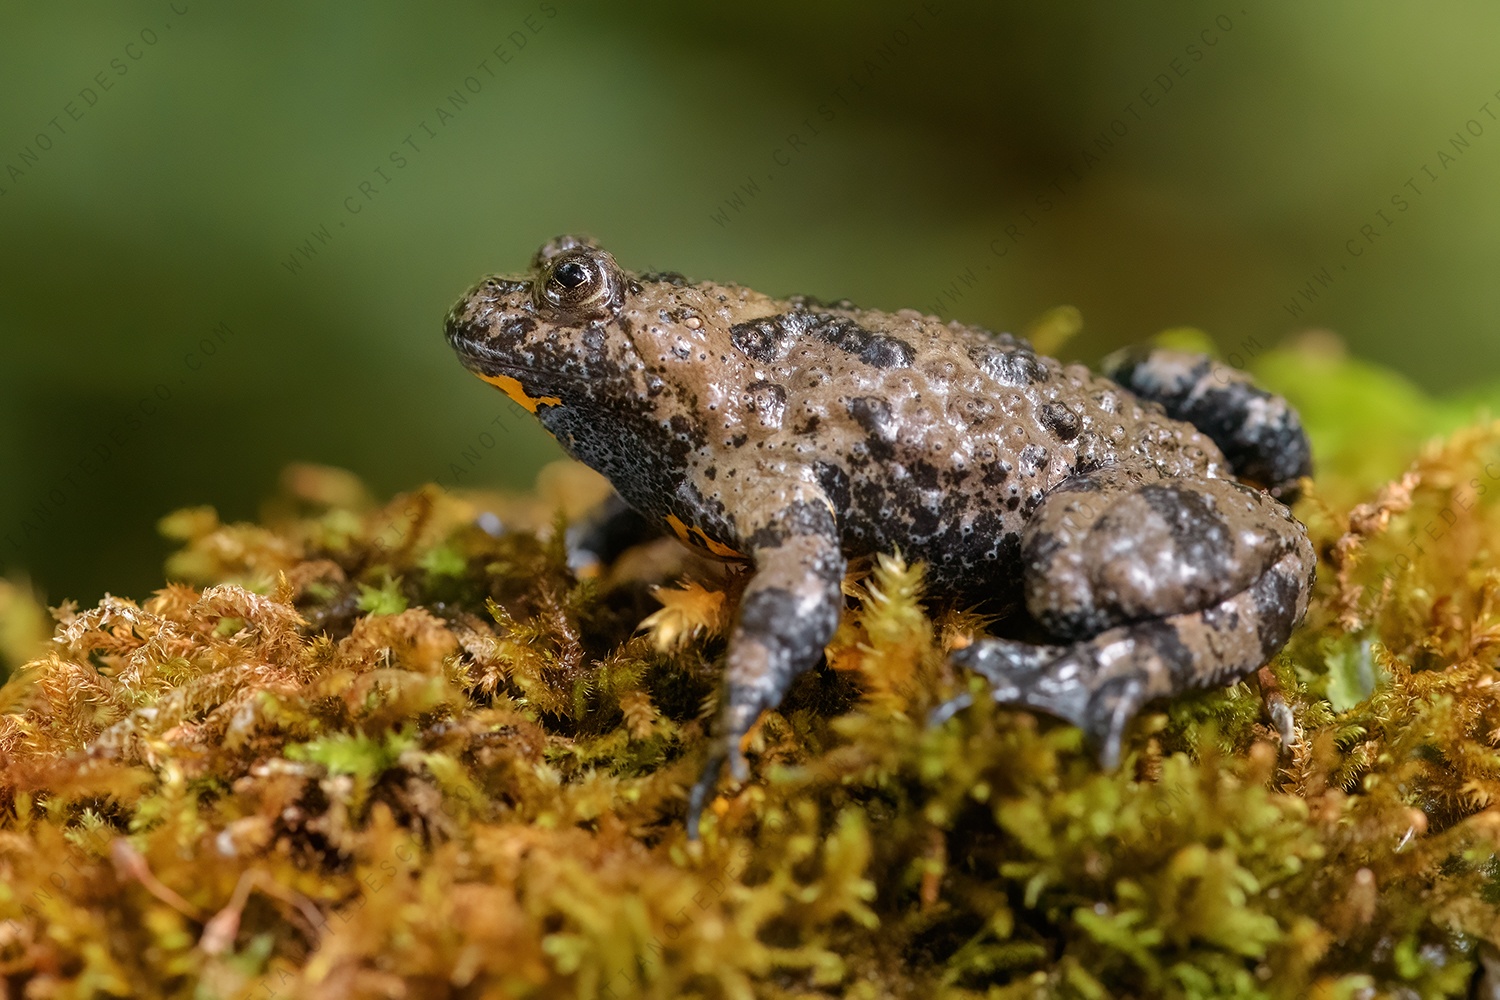 Yellow-Bellied Toad images (Bombina Pachypus)